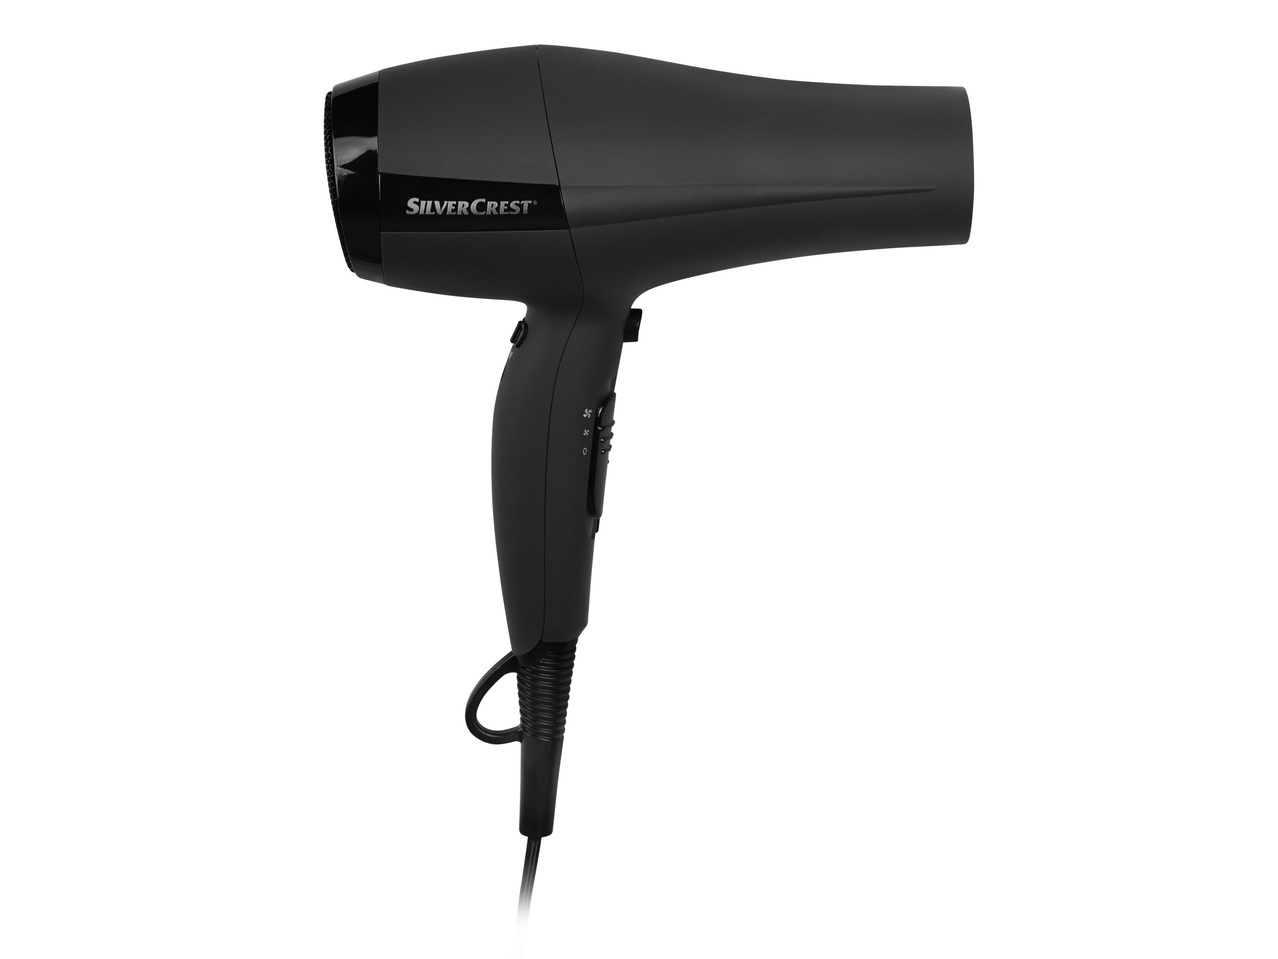 SILVERCREST PERSONAL CARE 2200W Ionic Hair Dryer